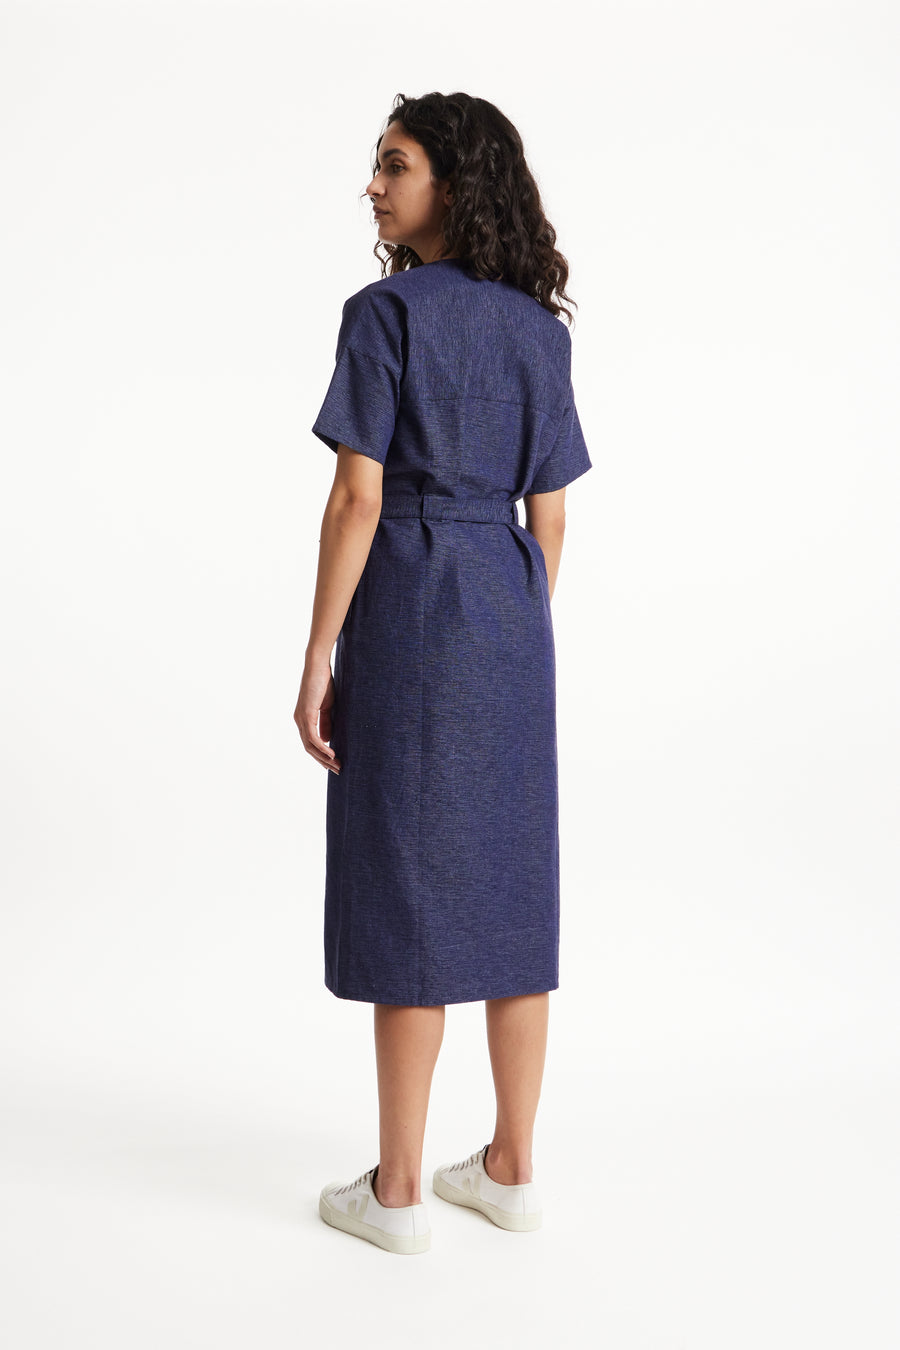 People Tree Fair Trade, Ethical & Sustainable India Dress in Navy 100% Organic Cotton